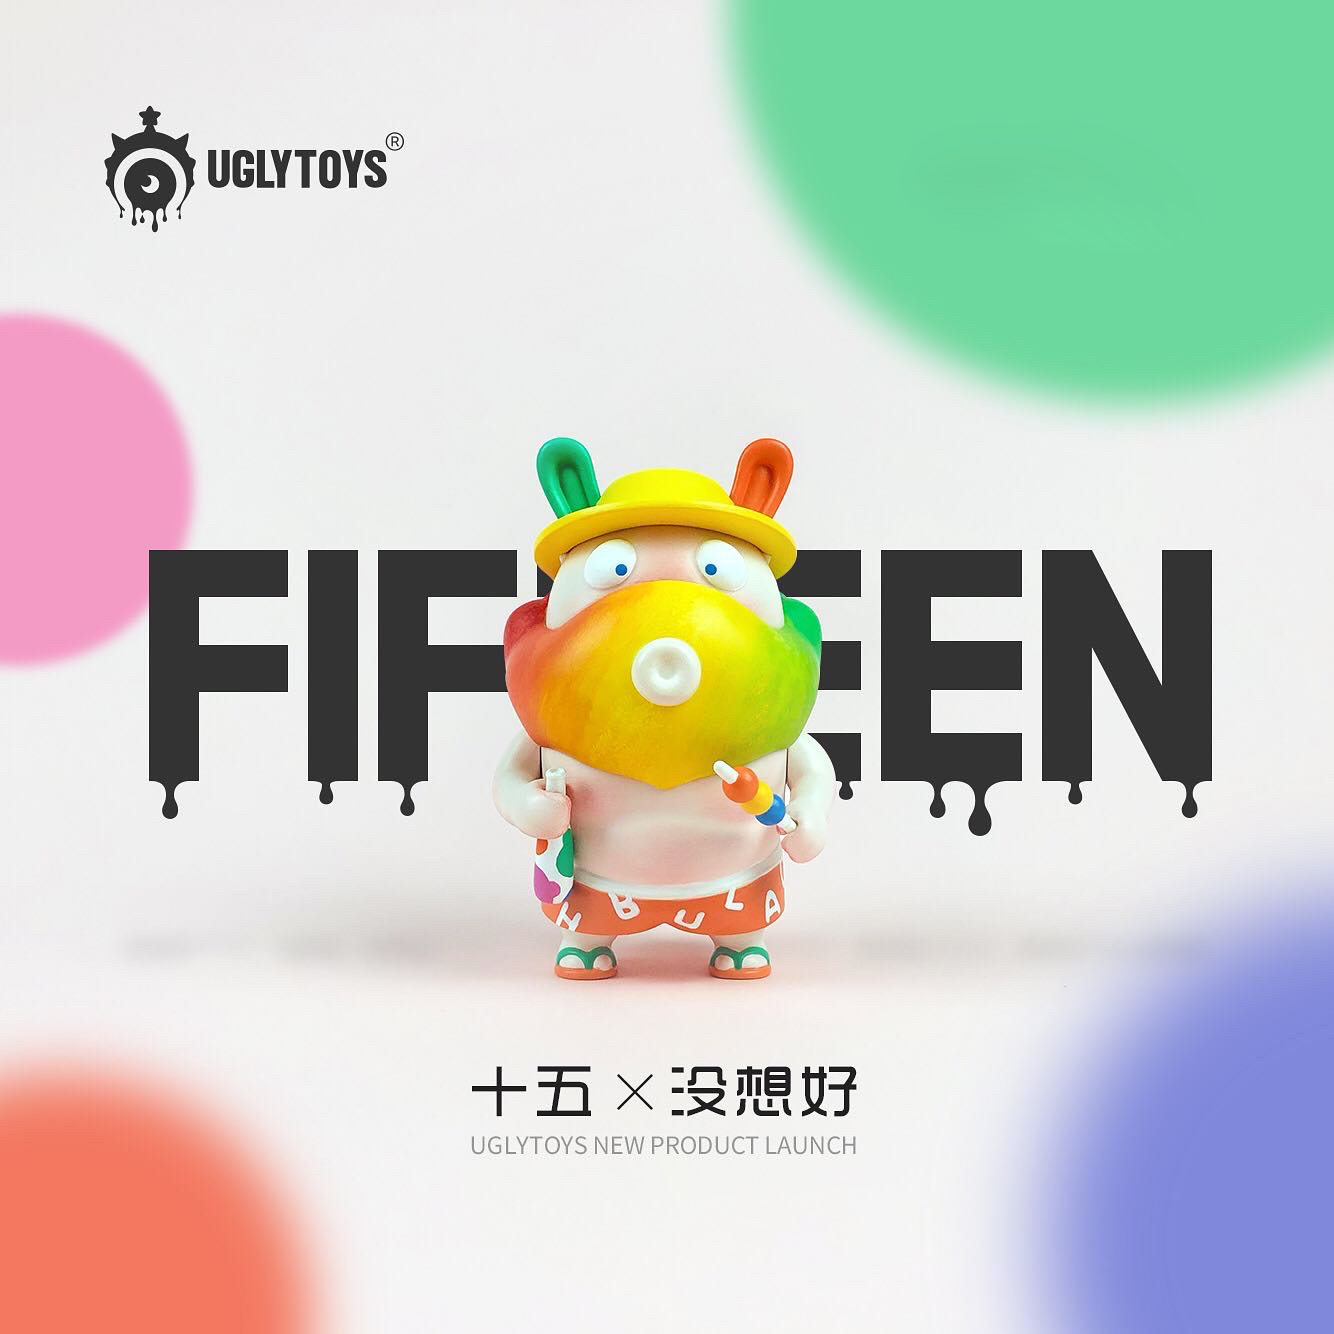 Uncle Fifteen by UglyToys toy figurine with bubblegum and candy, cartoon character design, 10cm Resin.